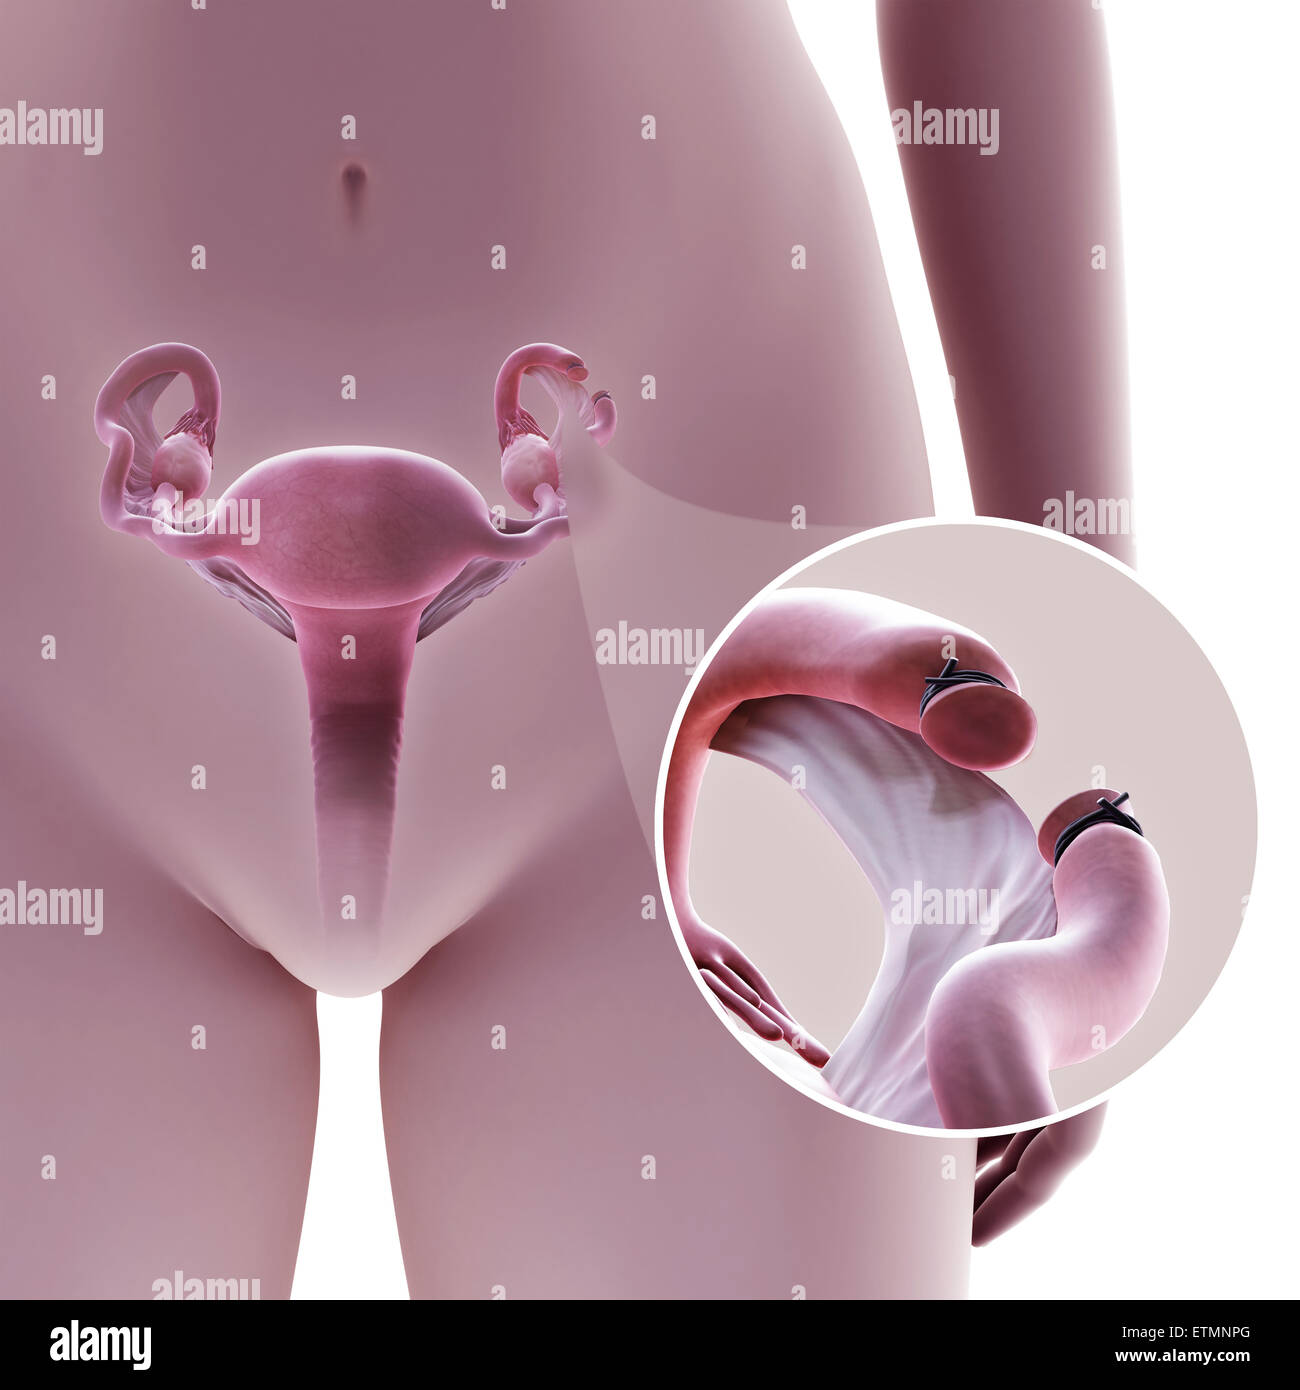 Illustration showing tubal ligation of the Fallopian tube by method resection, where a section of the tube is removed to prevent fertilization. Stock Photo